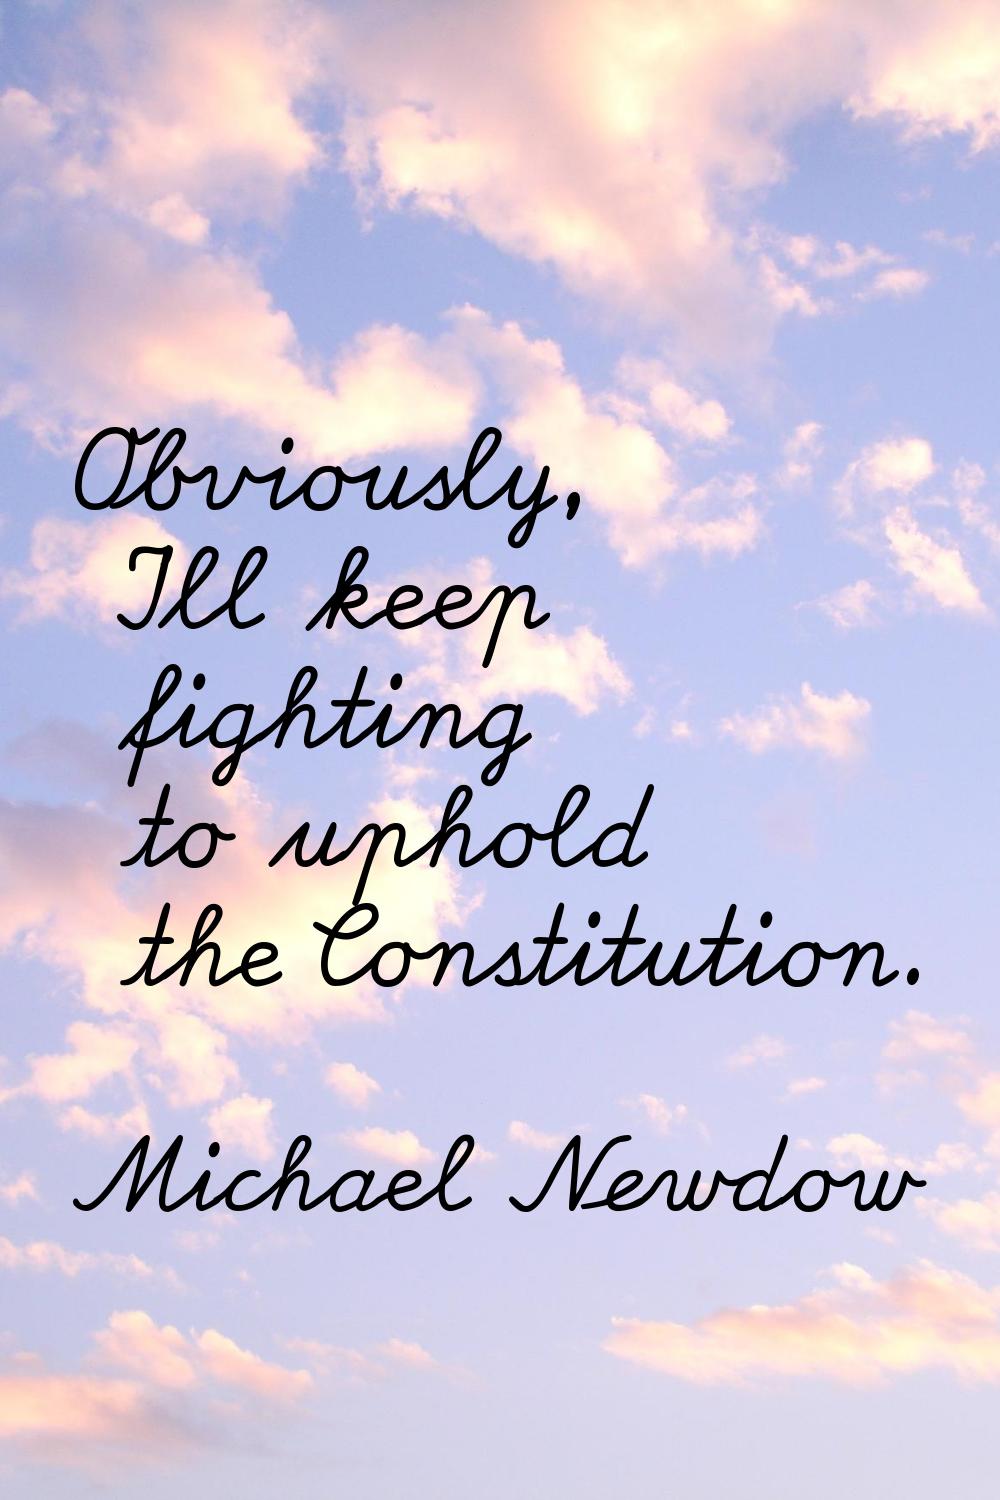 Obviously, I'll keep fighting to uphold the Constitution.